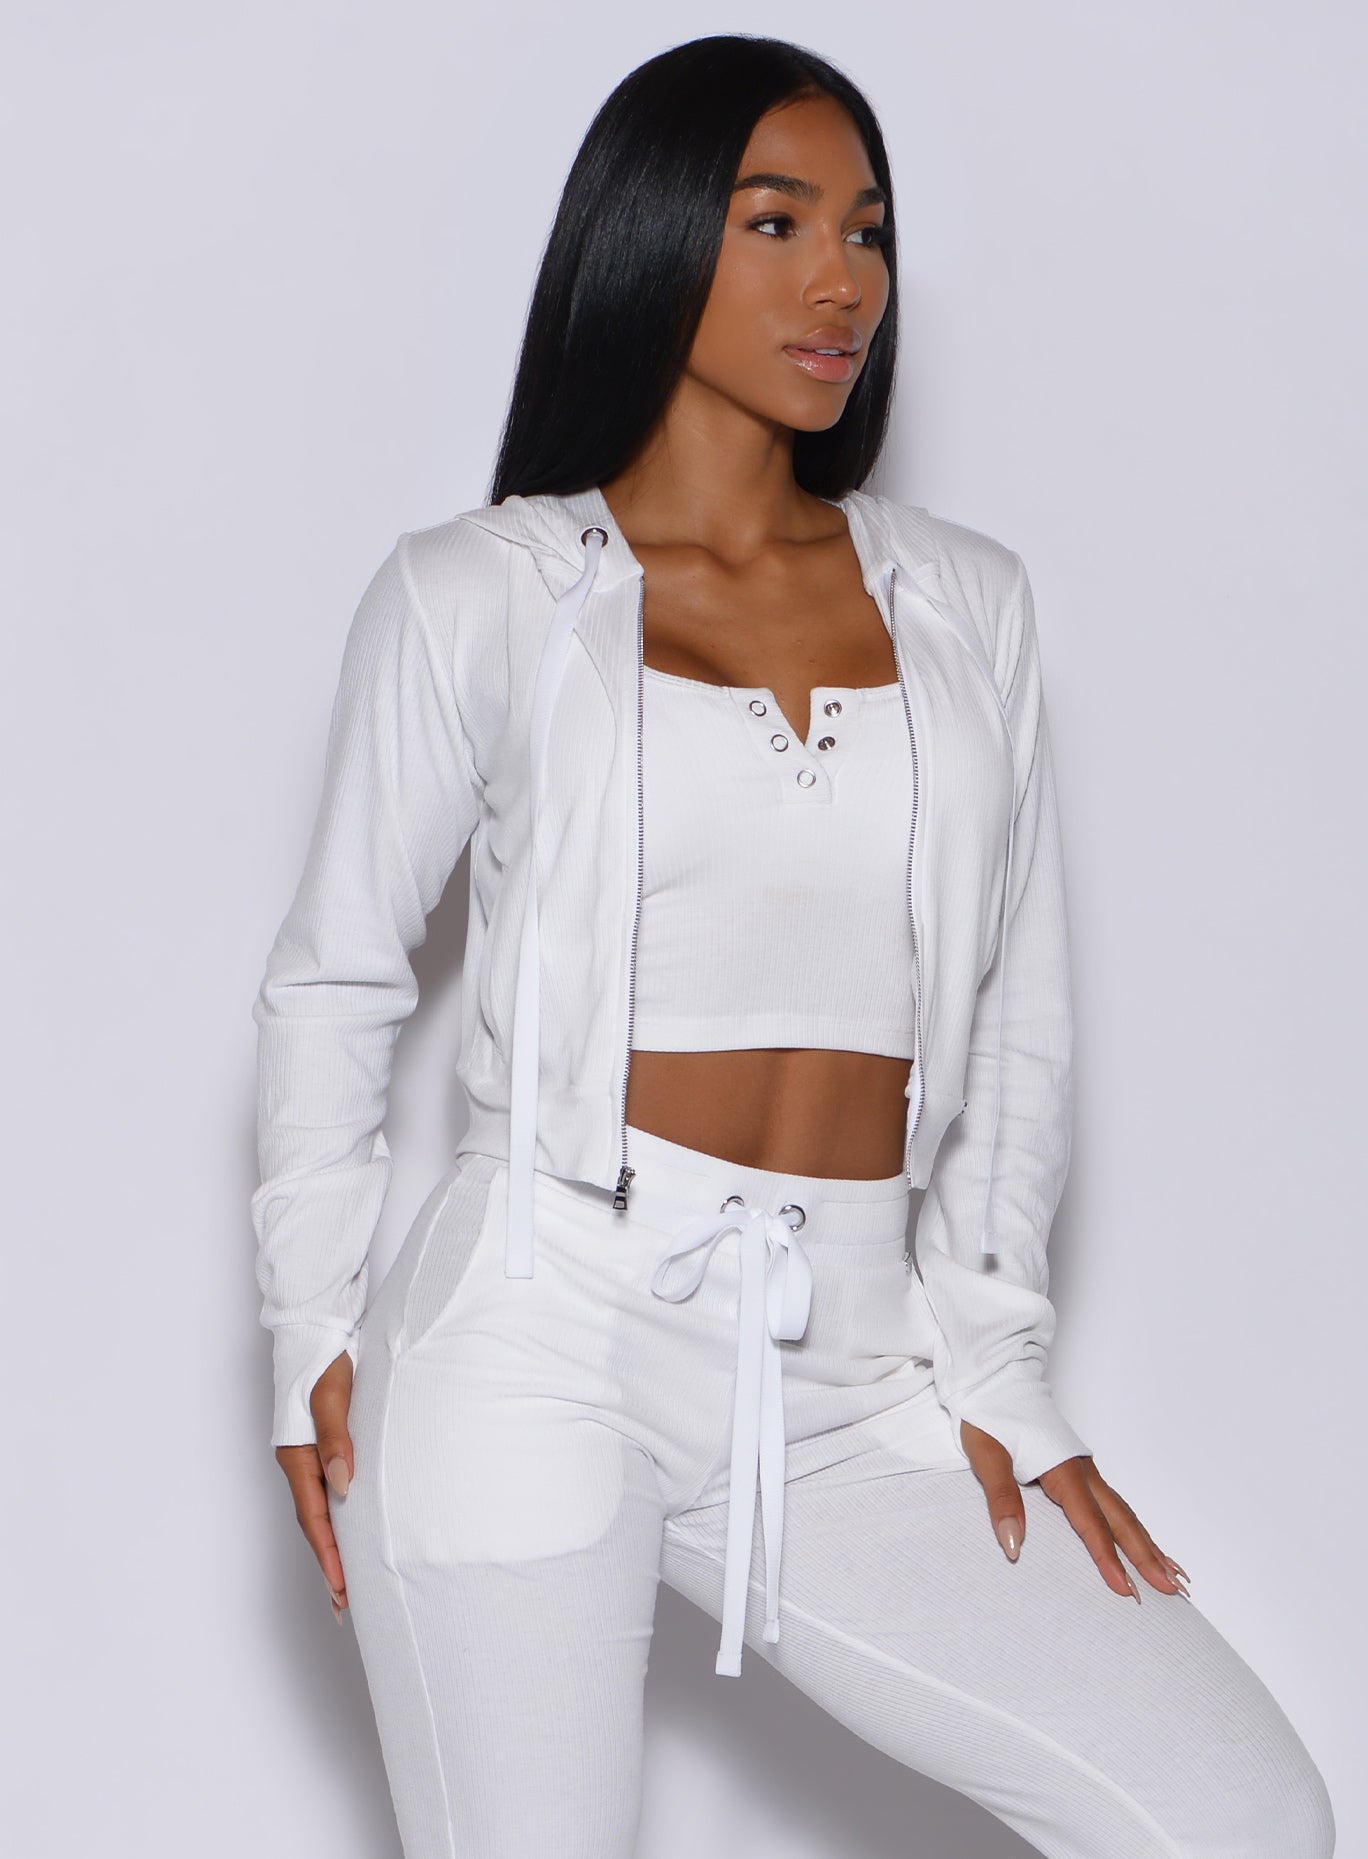 Right side profile view of a model angled right wearing our white comfort rib jacket and a matching joggers